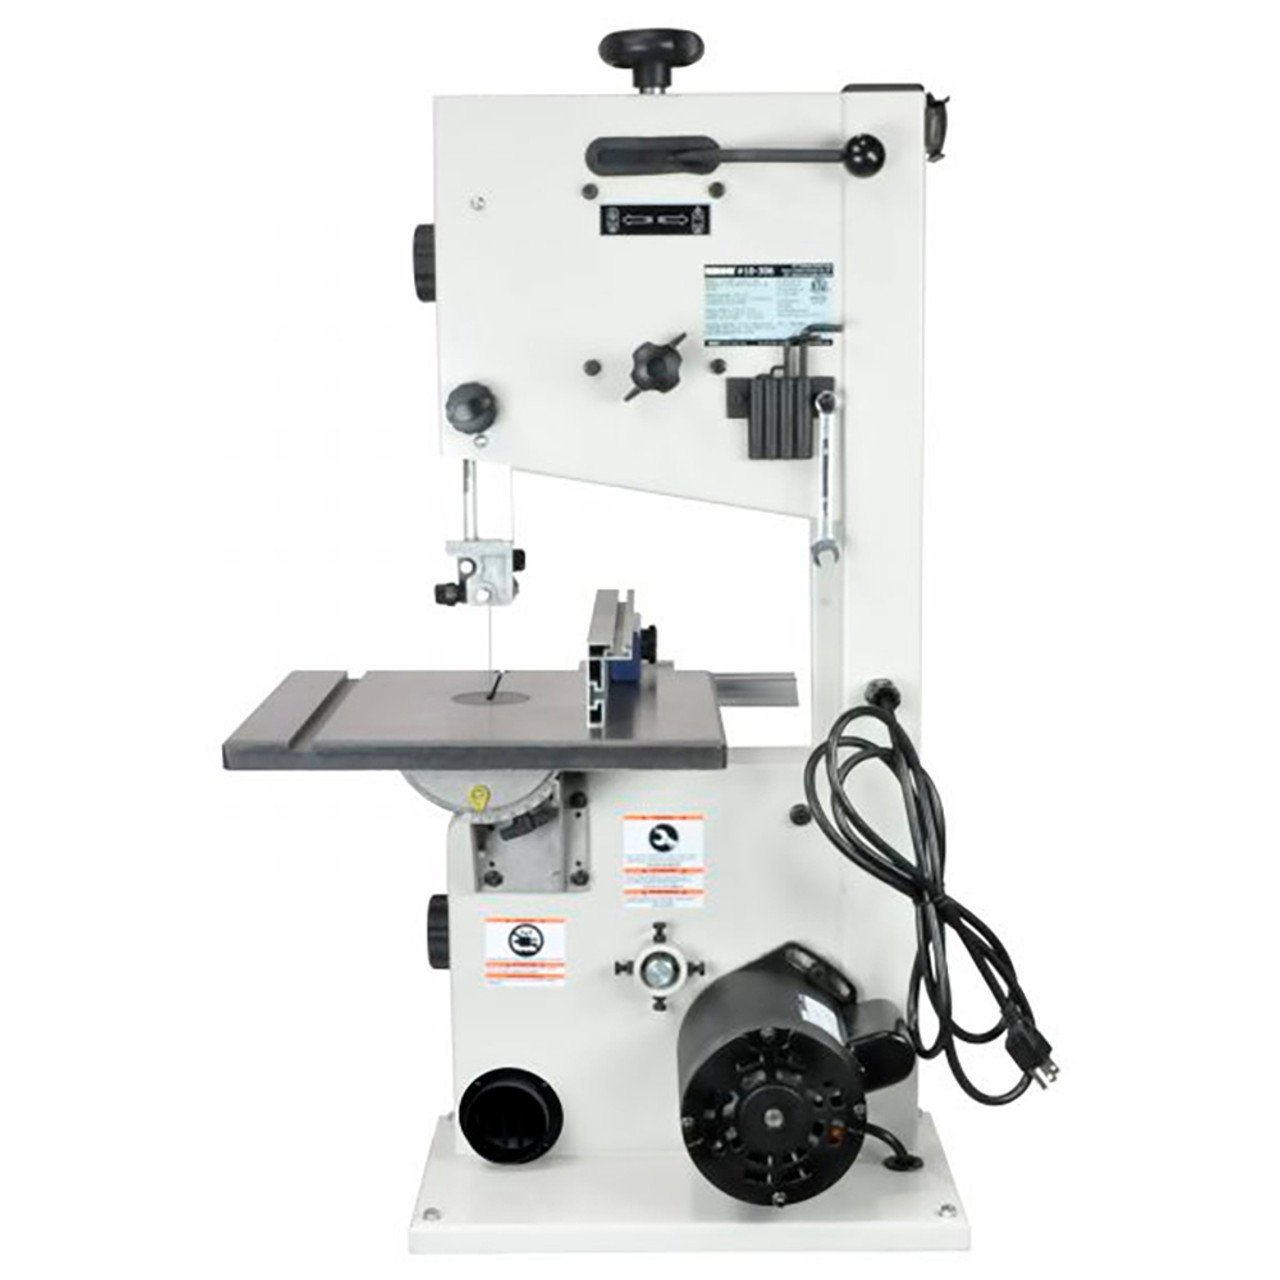 Rikon 10-3061 10 Inch Deluxe Bandsaw, 1/2 HP